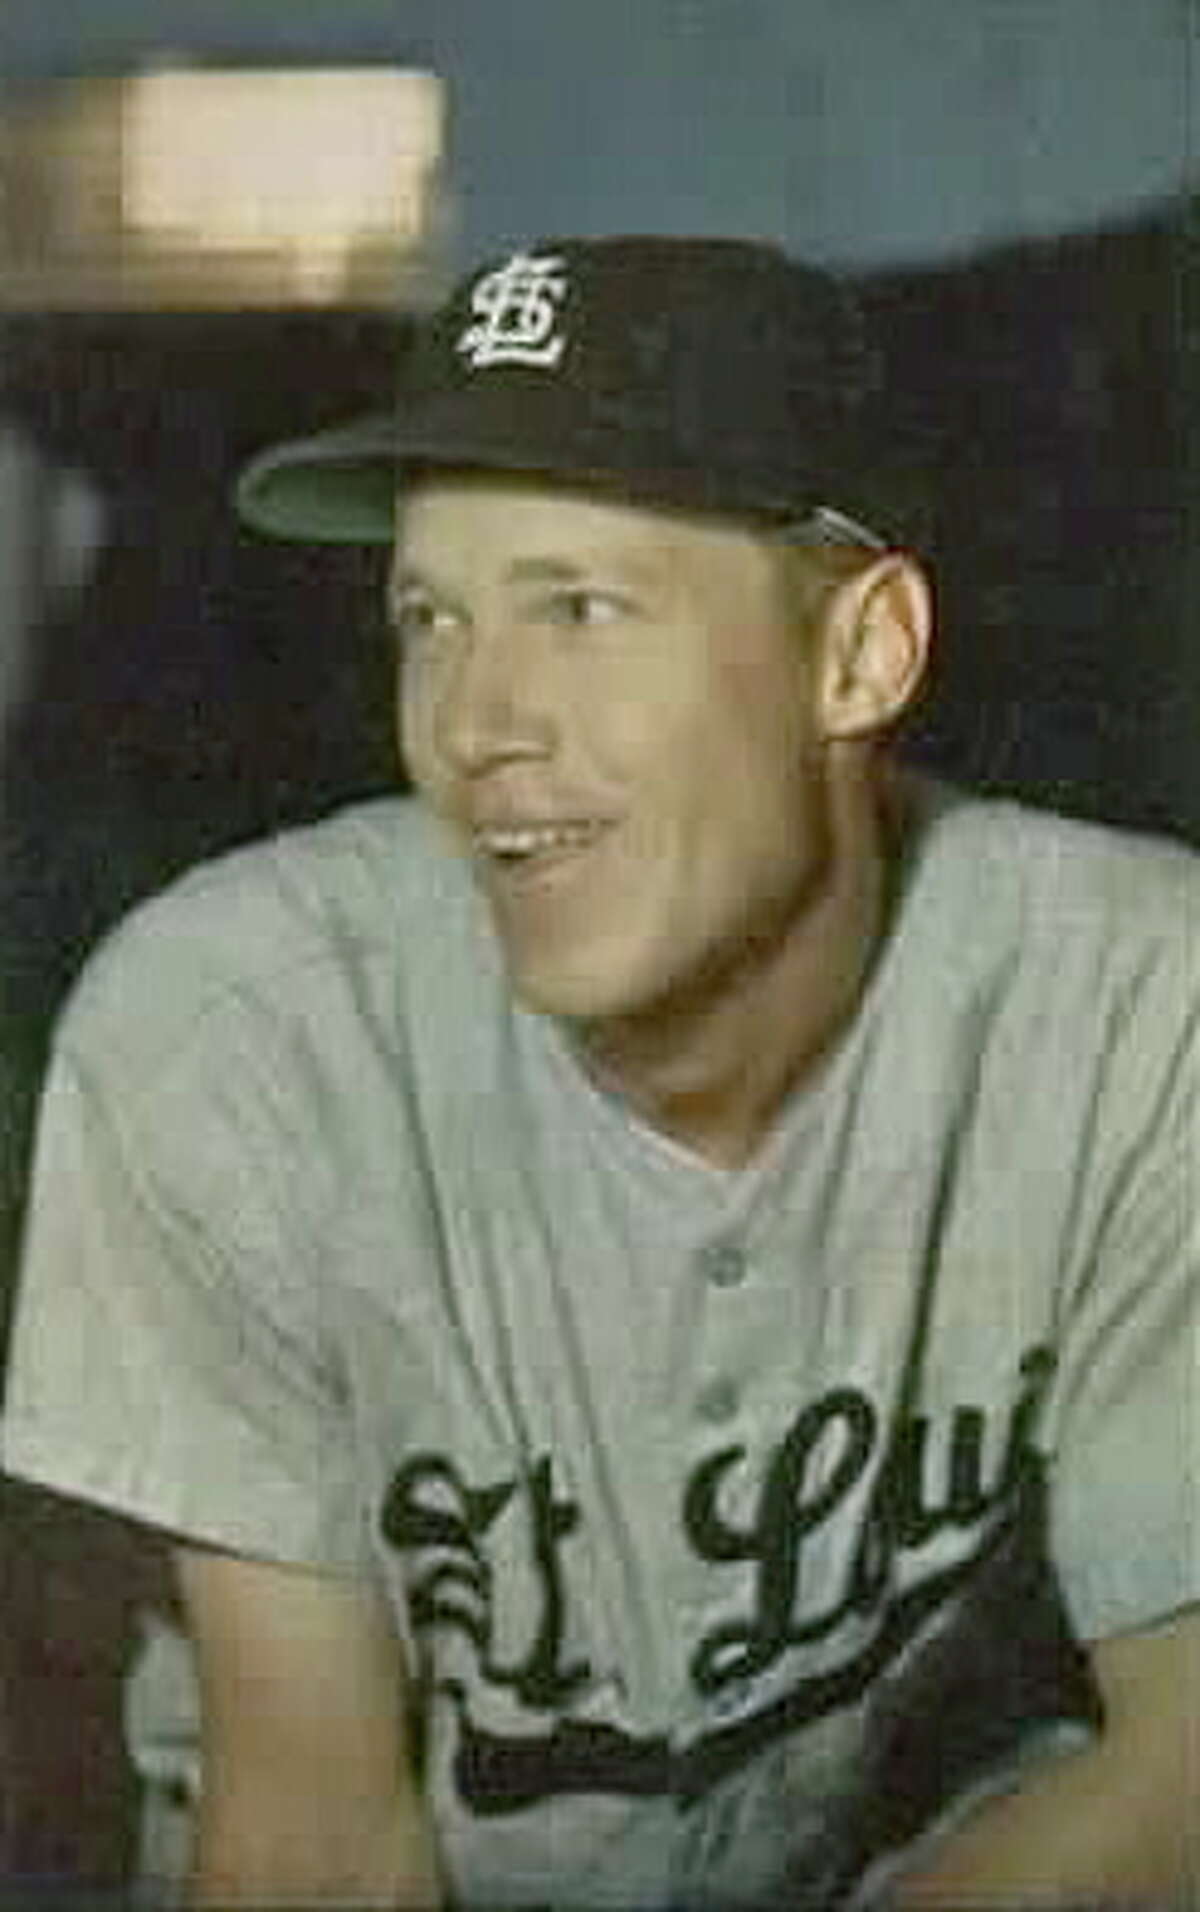 Don Lenhardt, Alton: Lenhardt played for the St. Louis Browns, twice, and was part of the organization when they transitioned to Baltimore to become the Orioles. He also played for the Detroit Tigers and Boston Red Sox. Lenhardt has the distinction of hitting two grand slams in the same week for two different teams.